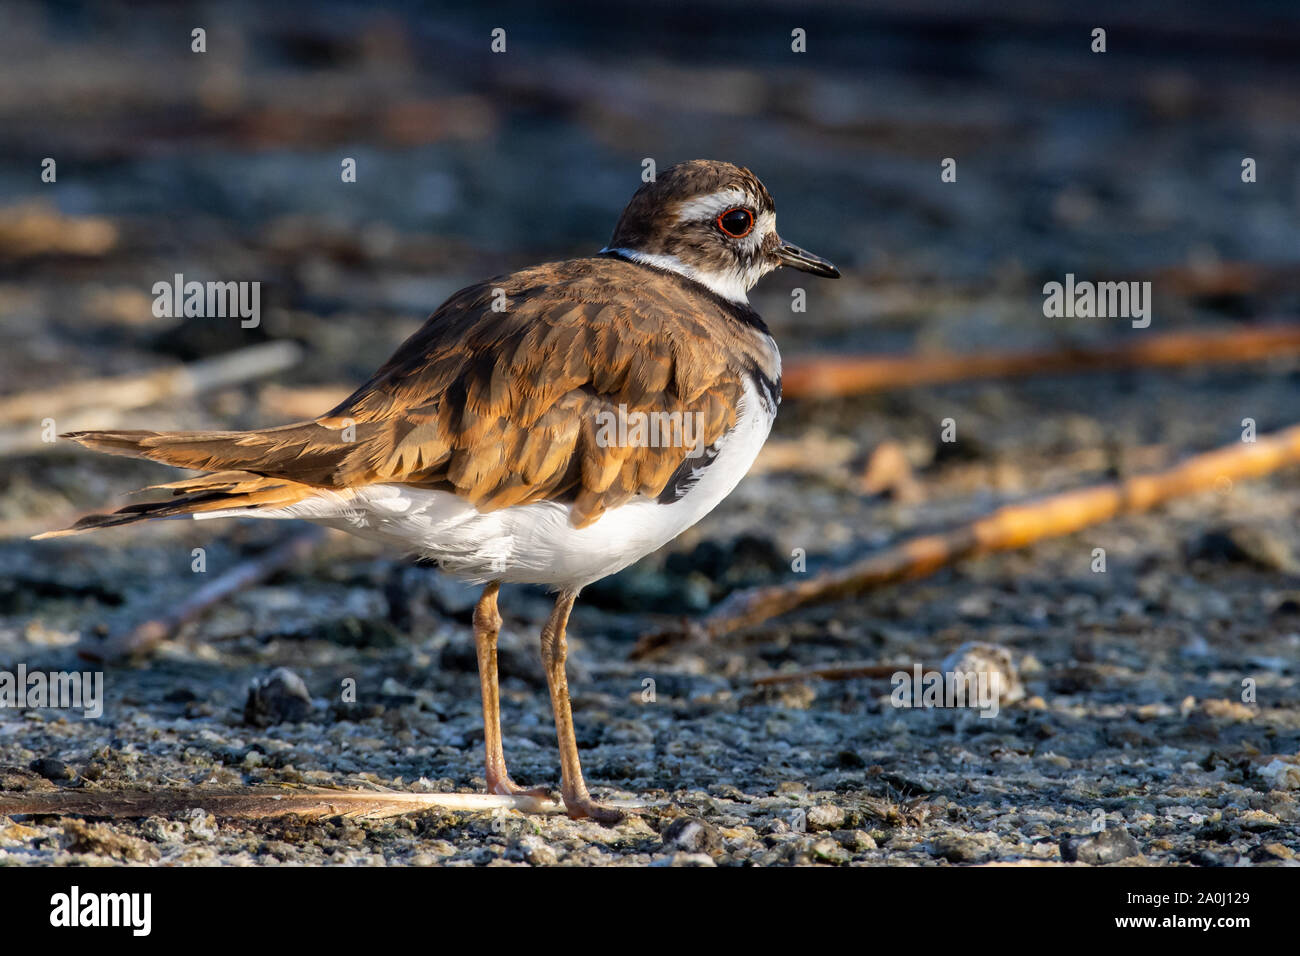 A killdeer (Charadrius vociferus) standing on the ground searching for food in Canada. Stock Photo